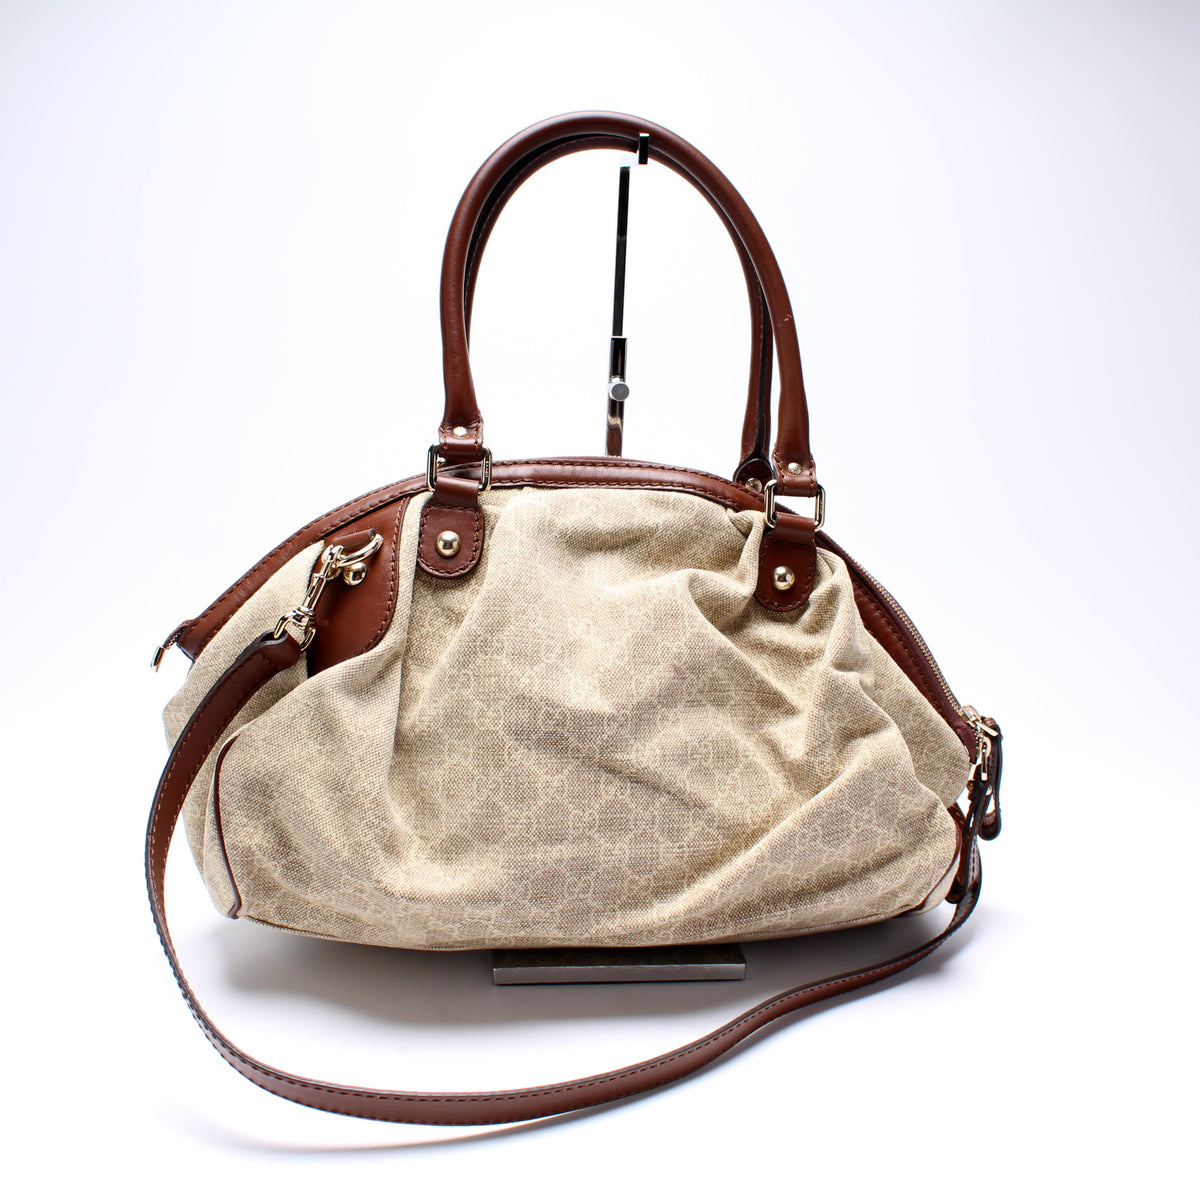 Mcm - Authenticated Boston Handbag - Linen Brown for Women, Very Good Condition